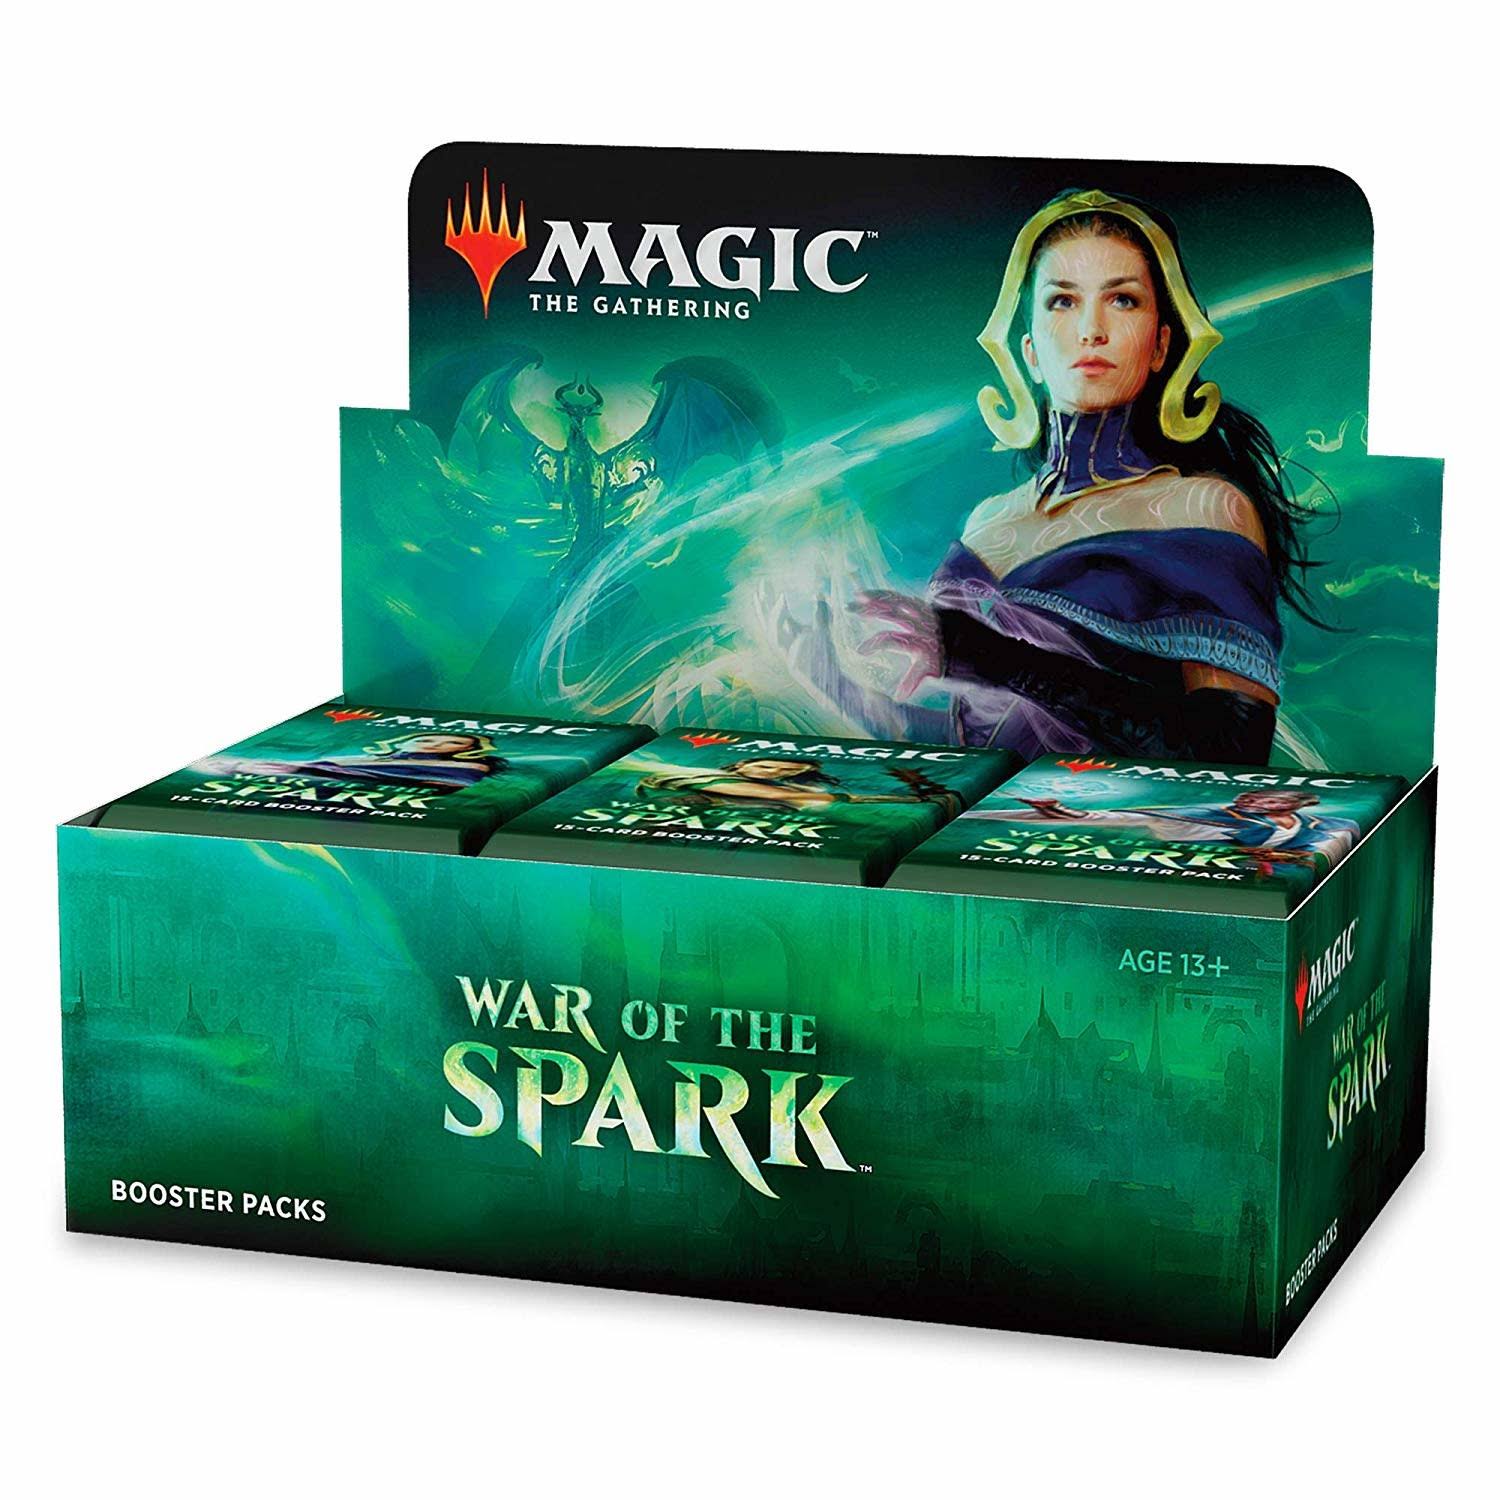 Magic: The Gathering Booster Box - War of the Spark